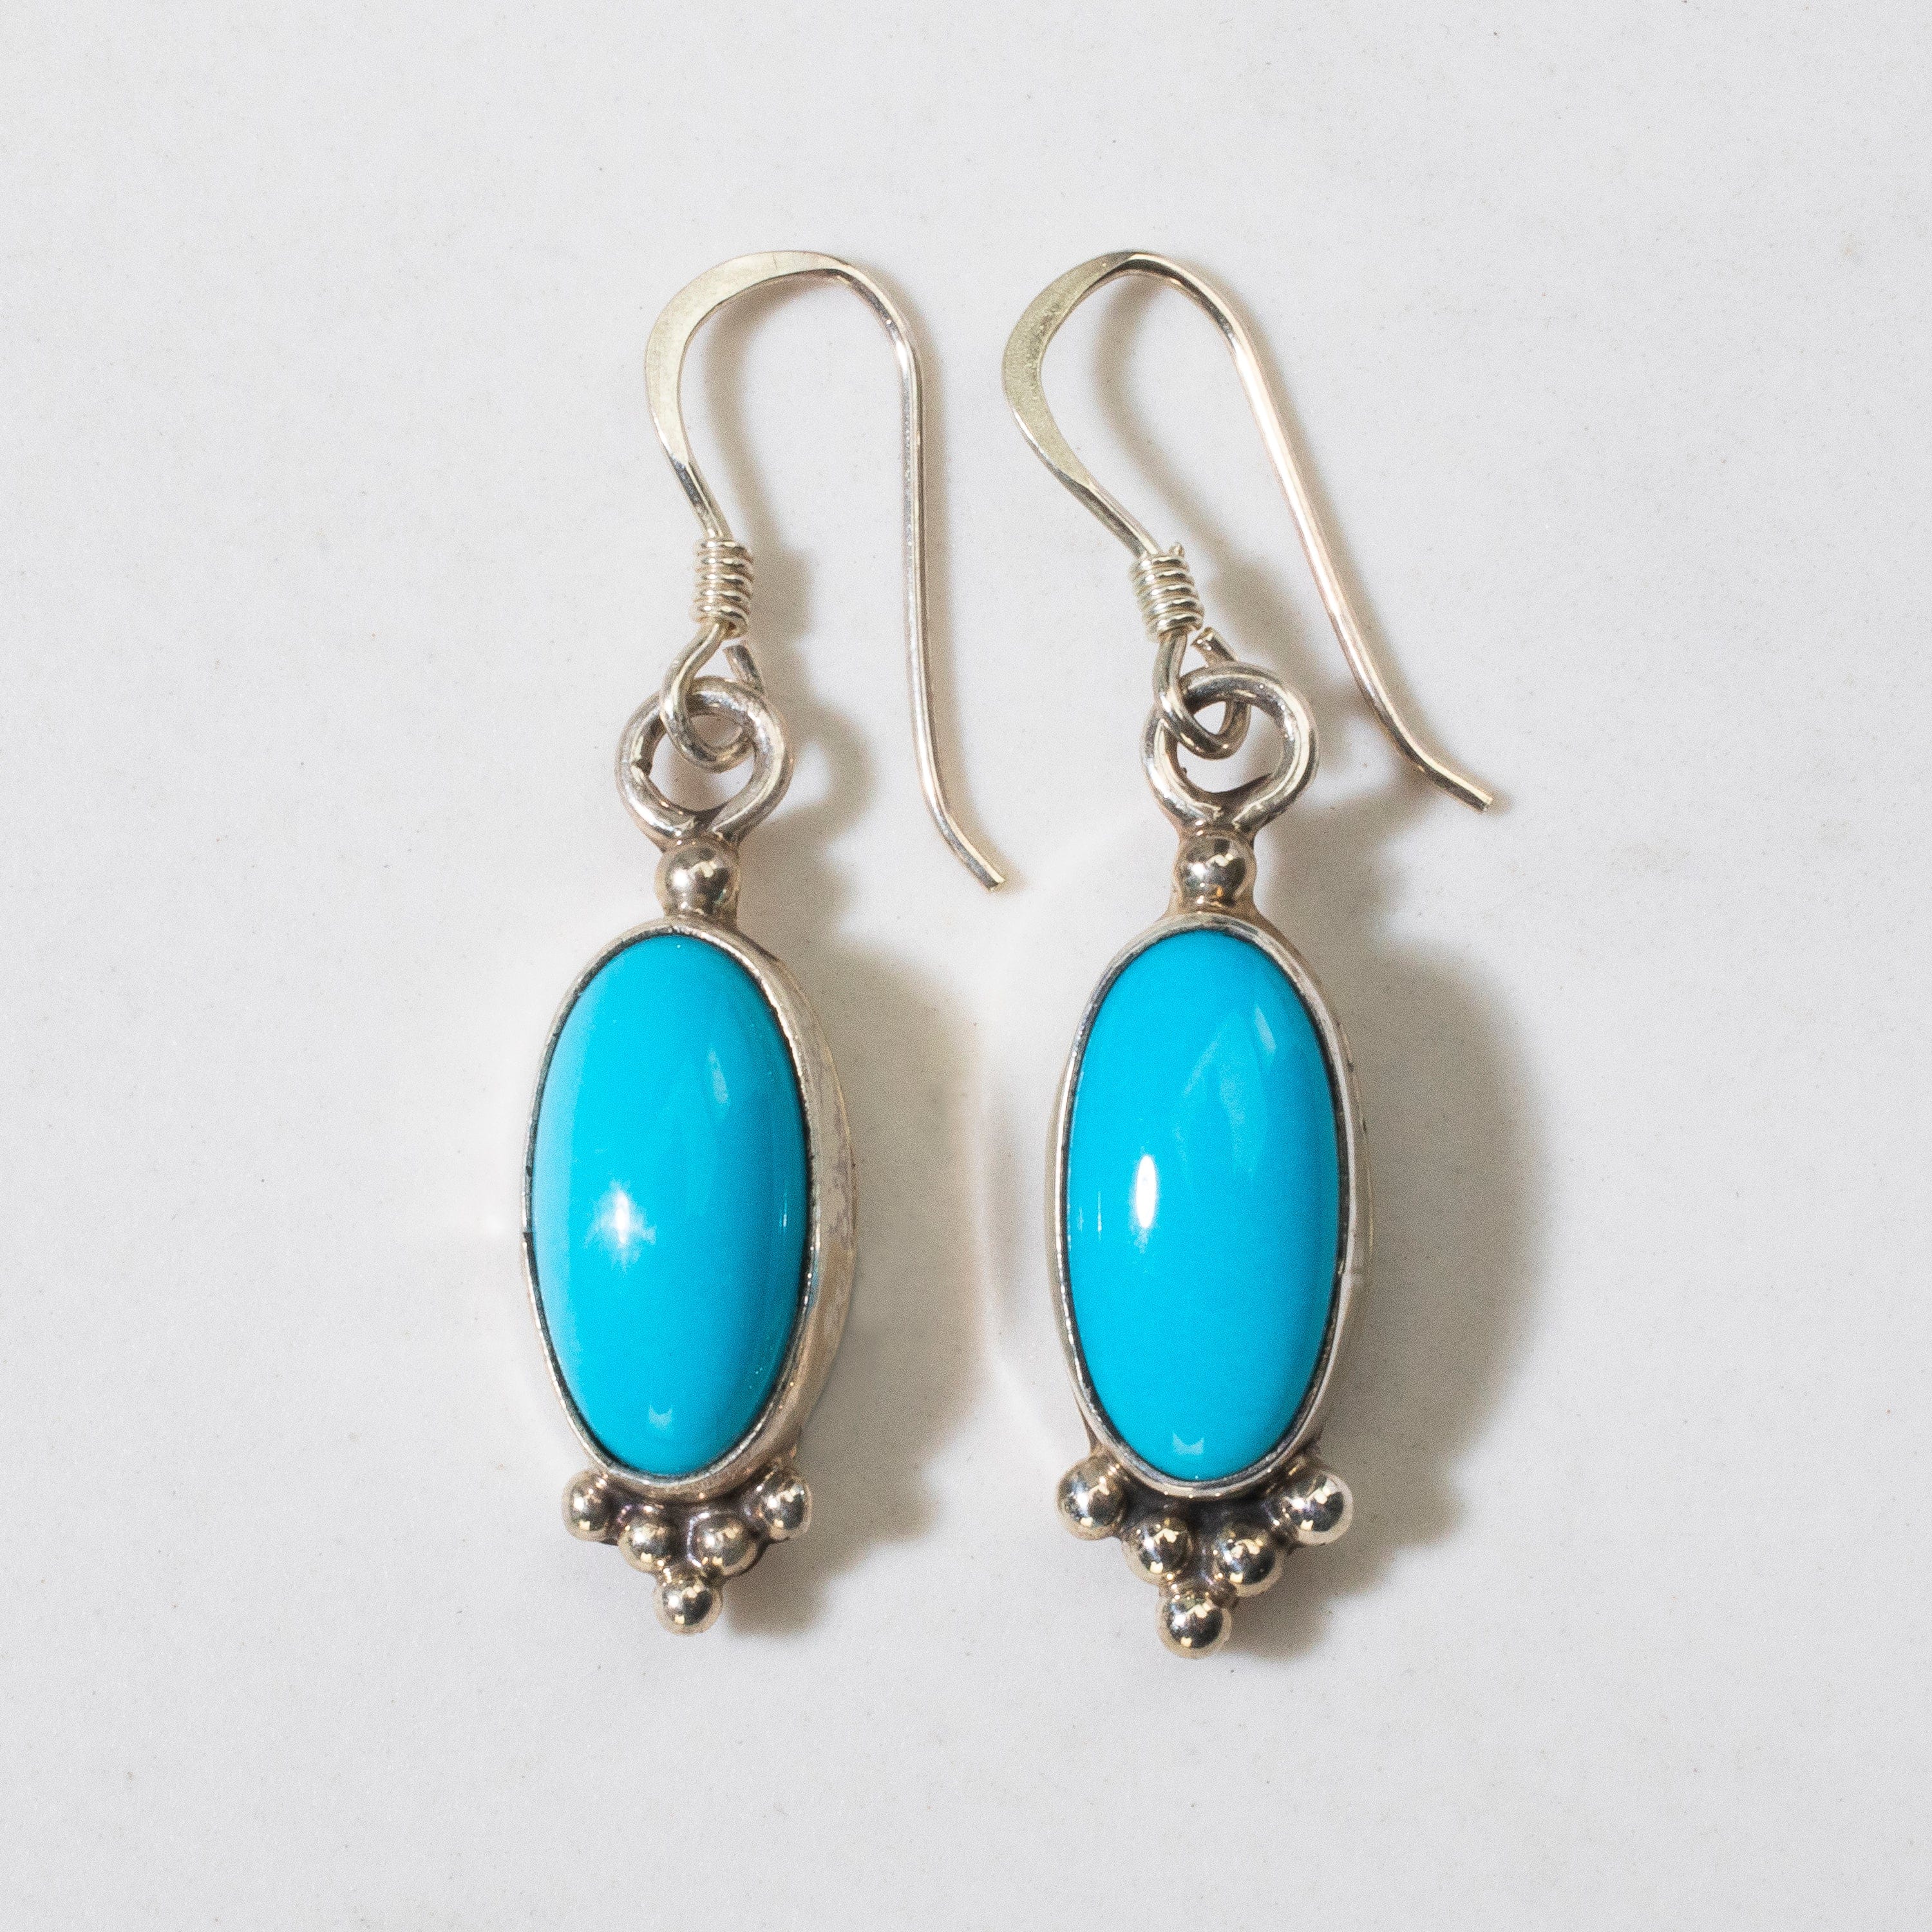 Kalifano Native American Jewelry Sleeping Beauty Turquoise Dangle Oval Navajo USA Native American Made 925 Sterling Silver Earrings with French Hook NAE400.041